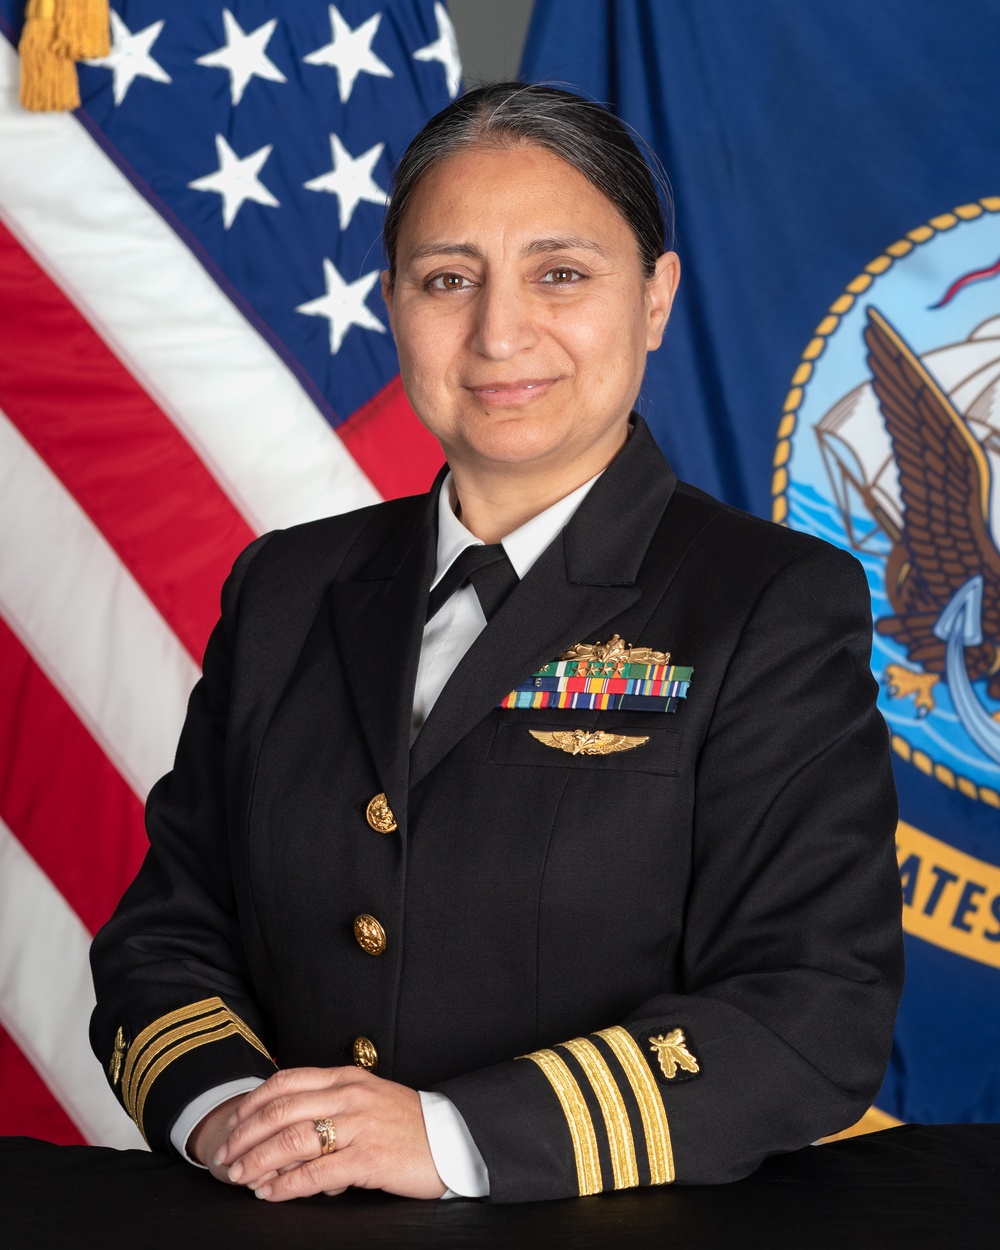 Navy Commander takes pride as first known Nepalese O5 in the United States Military